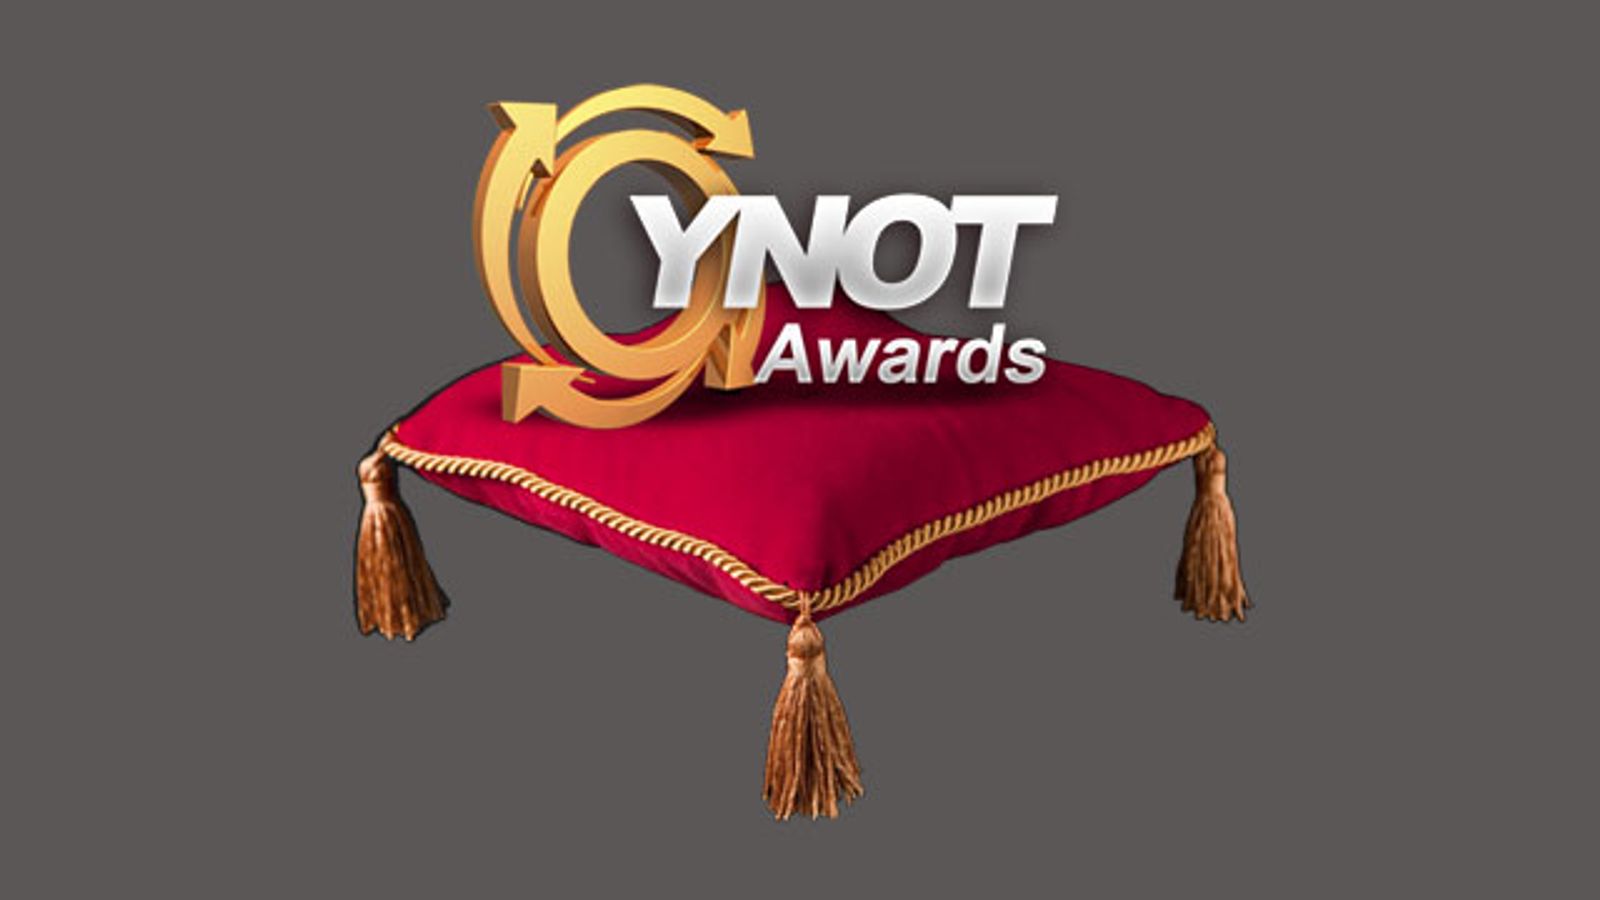 YNOT Awards Nominees Announced